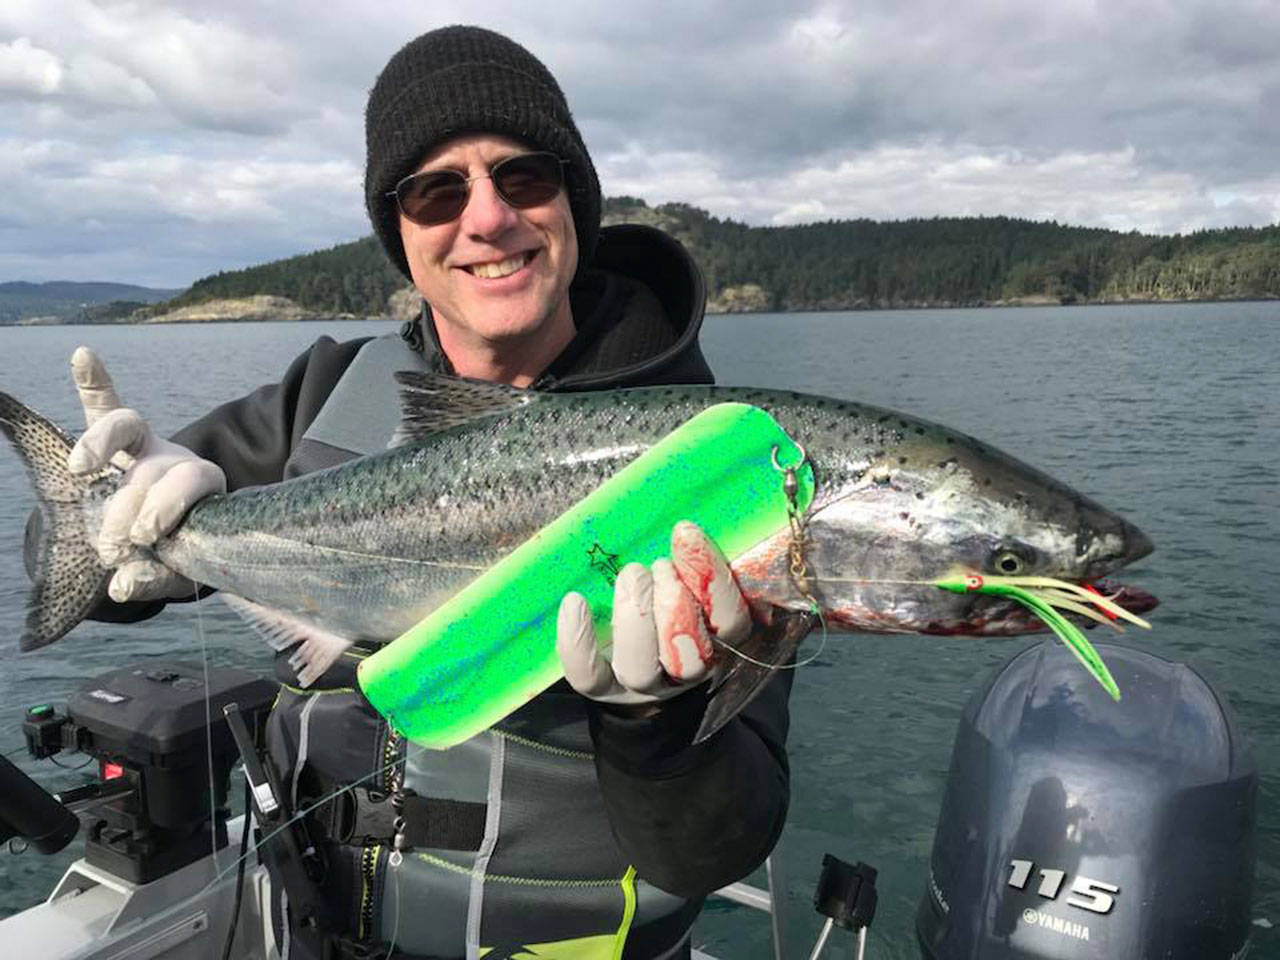 Puget Sound Anglers State Board